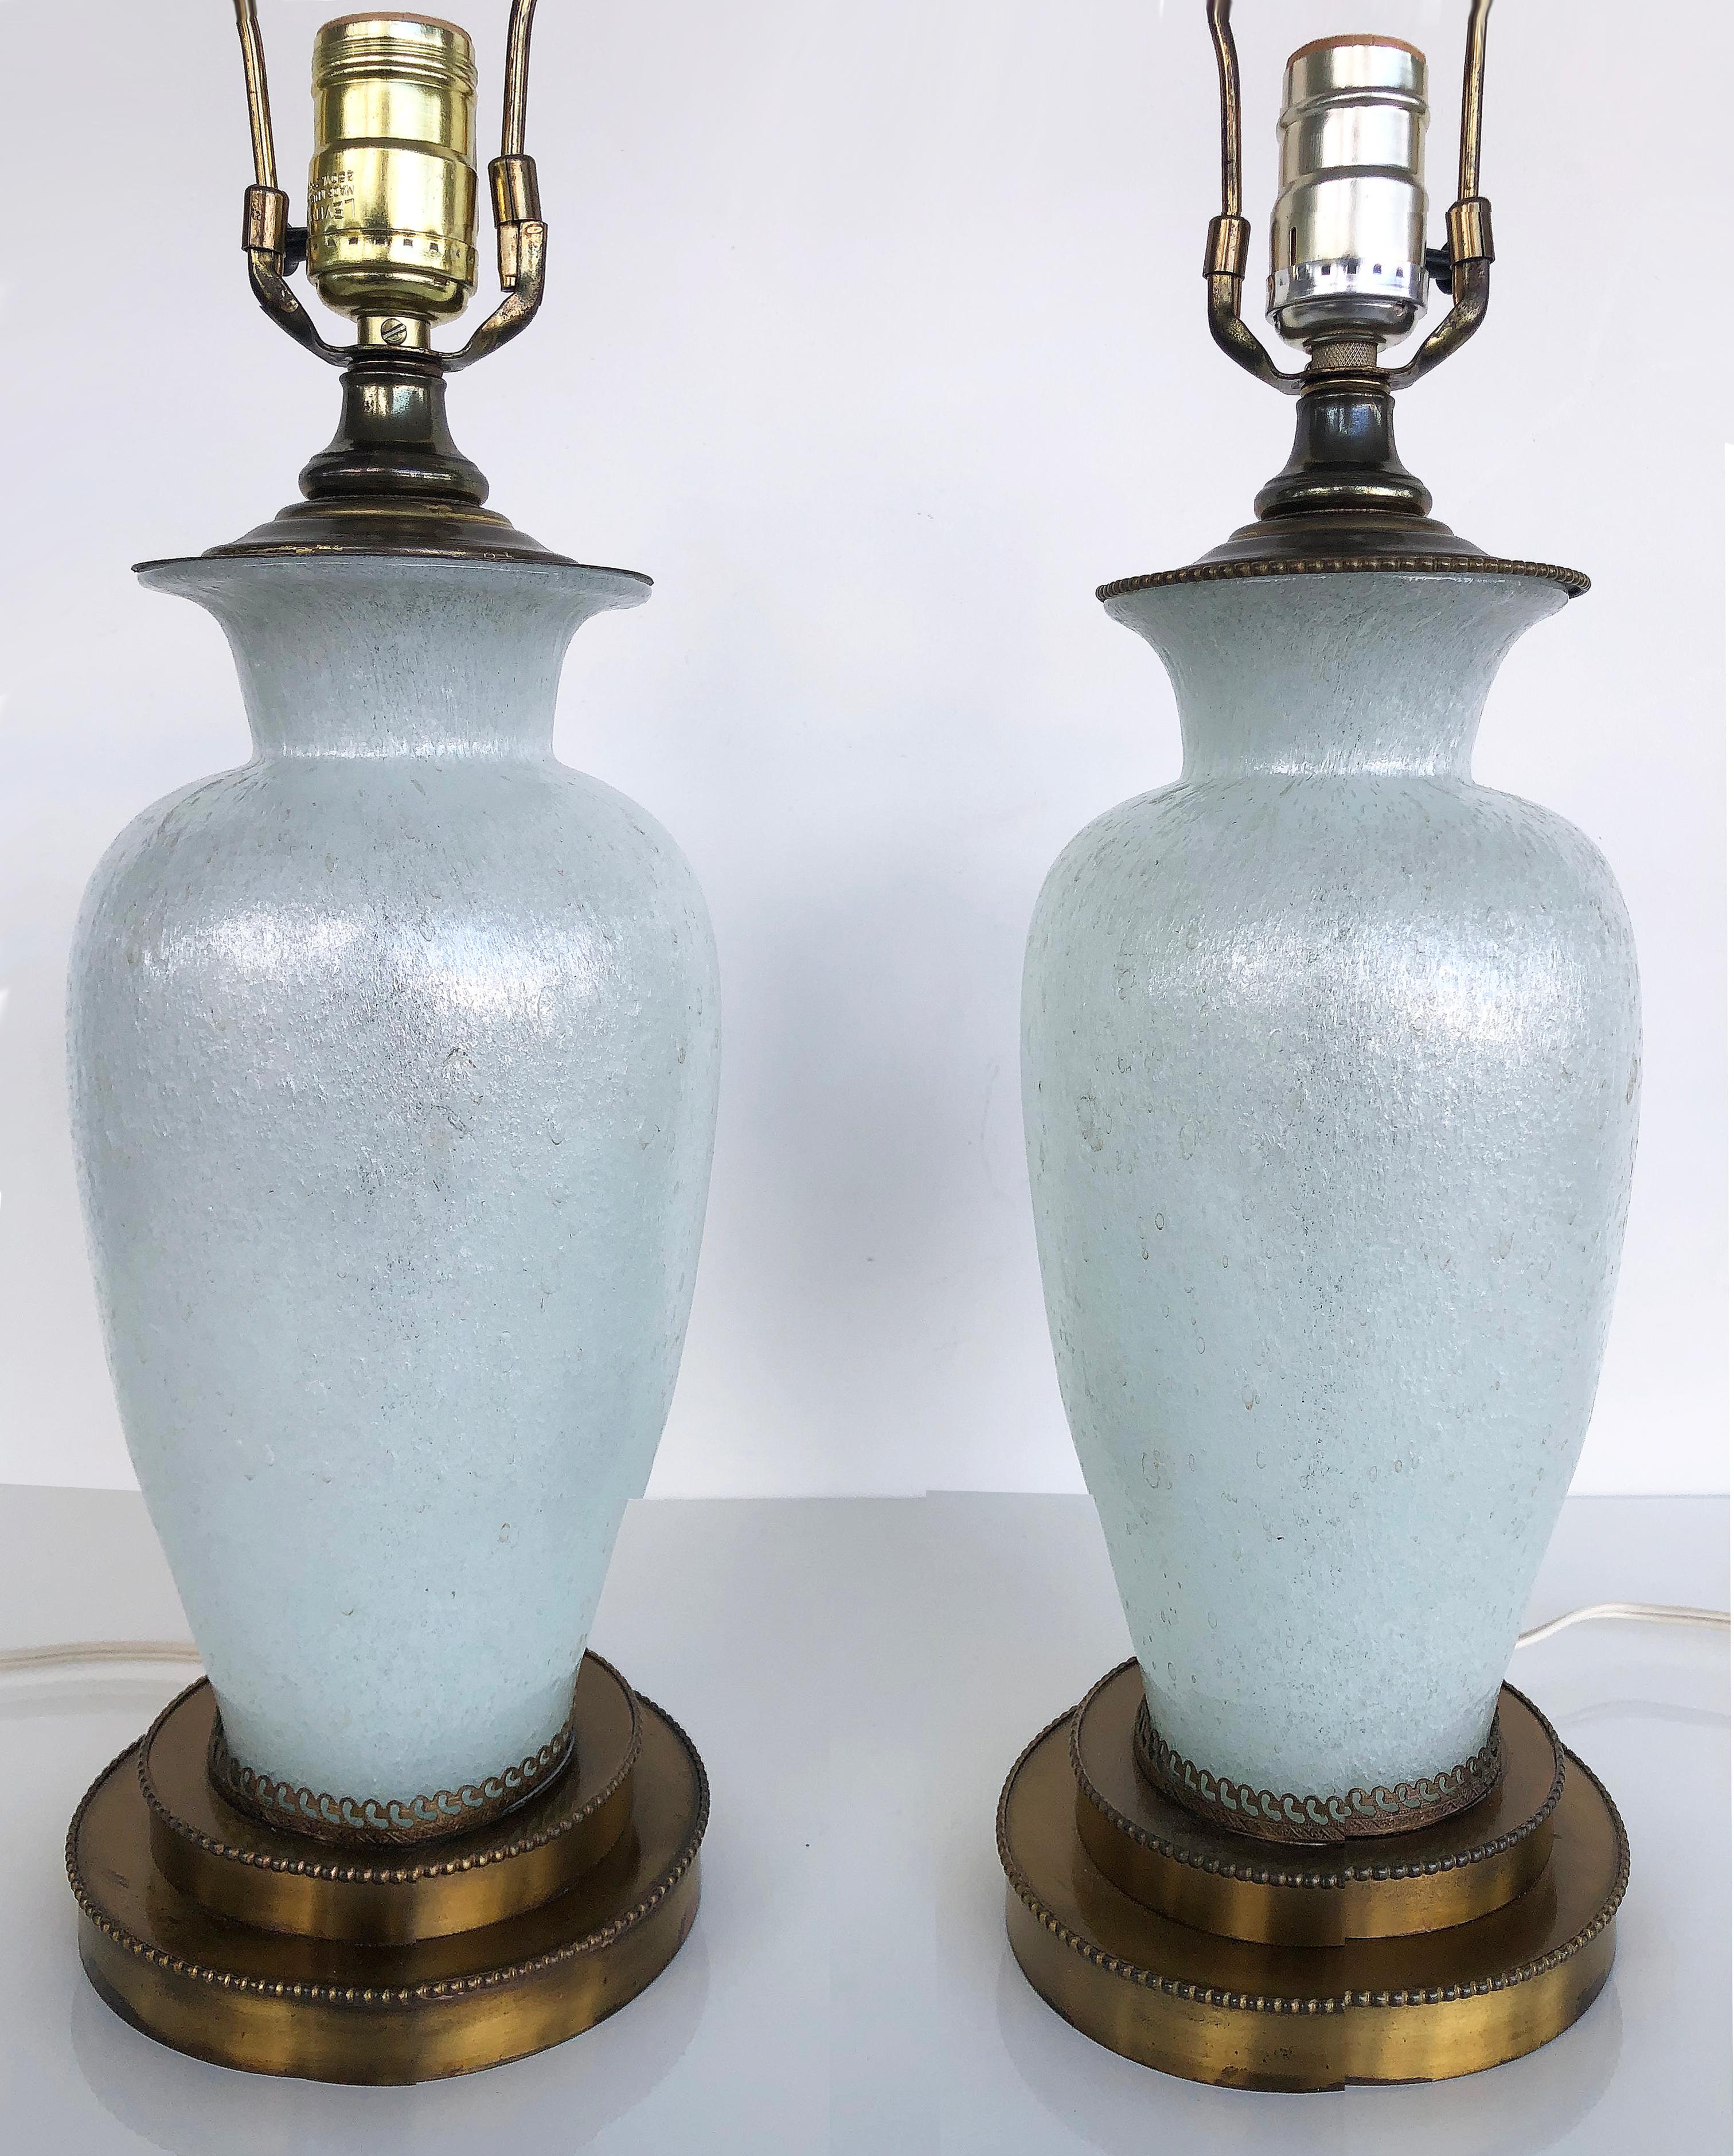 Vintage Murano textured pearlized glass table lamps, Pair

Offered for sale is a pair of vintage Murano glass table lamps with a pearlized and textured finish. They are wired and in working condition. The sockets accommodate a standard bulb. Harps